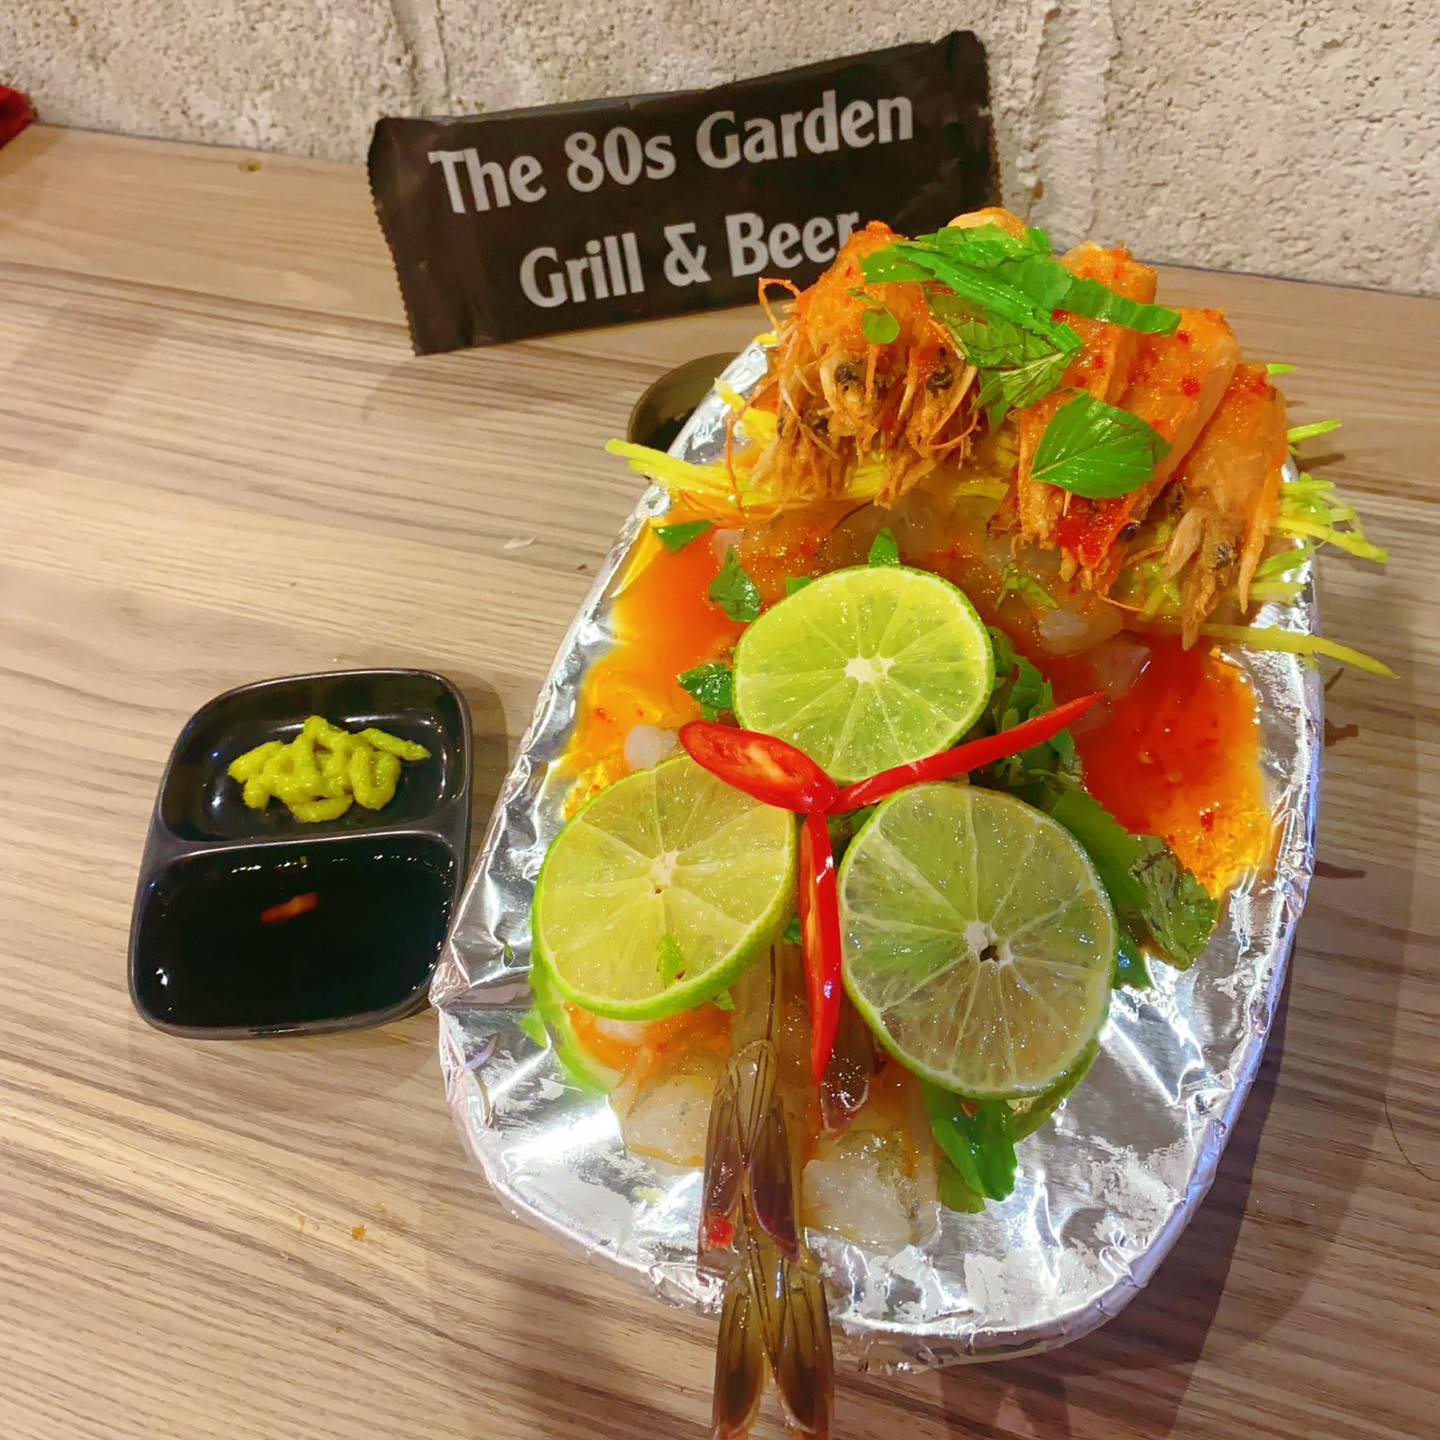 The 80s Garden - Grill & Beer ảnh 1